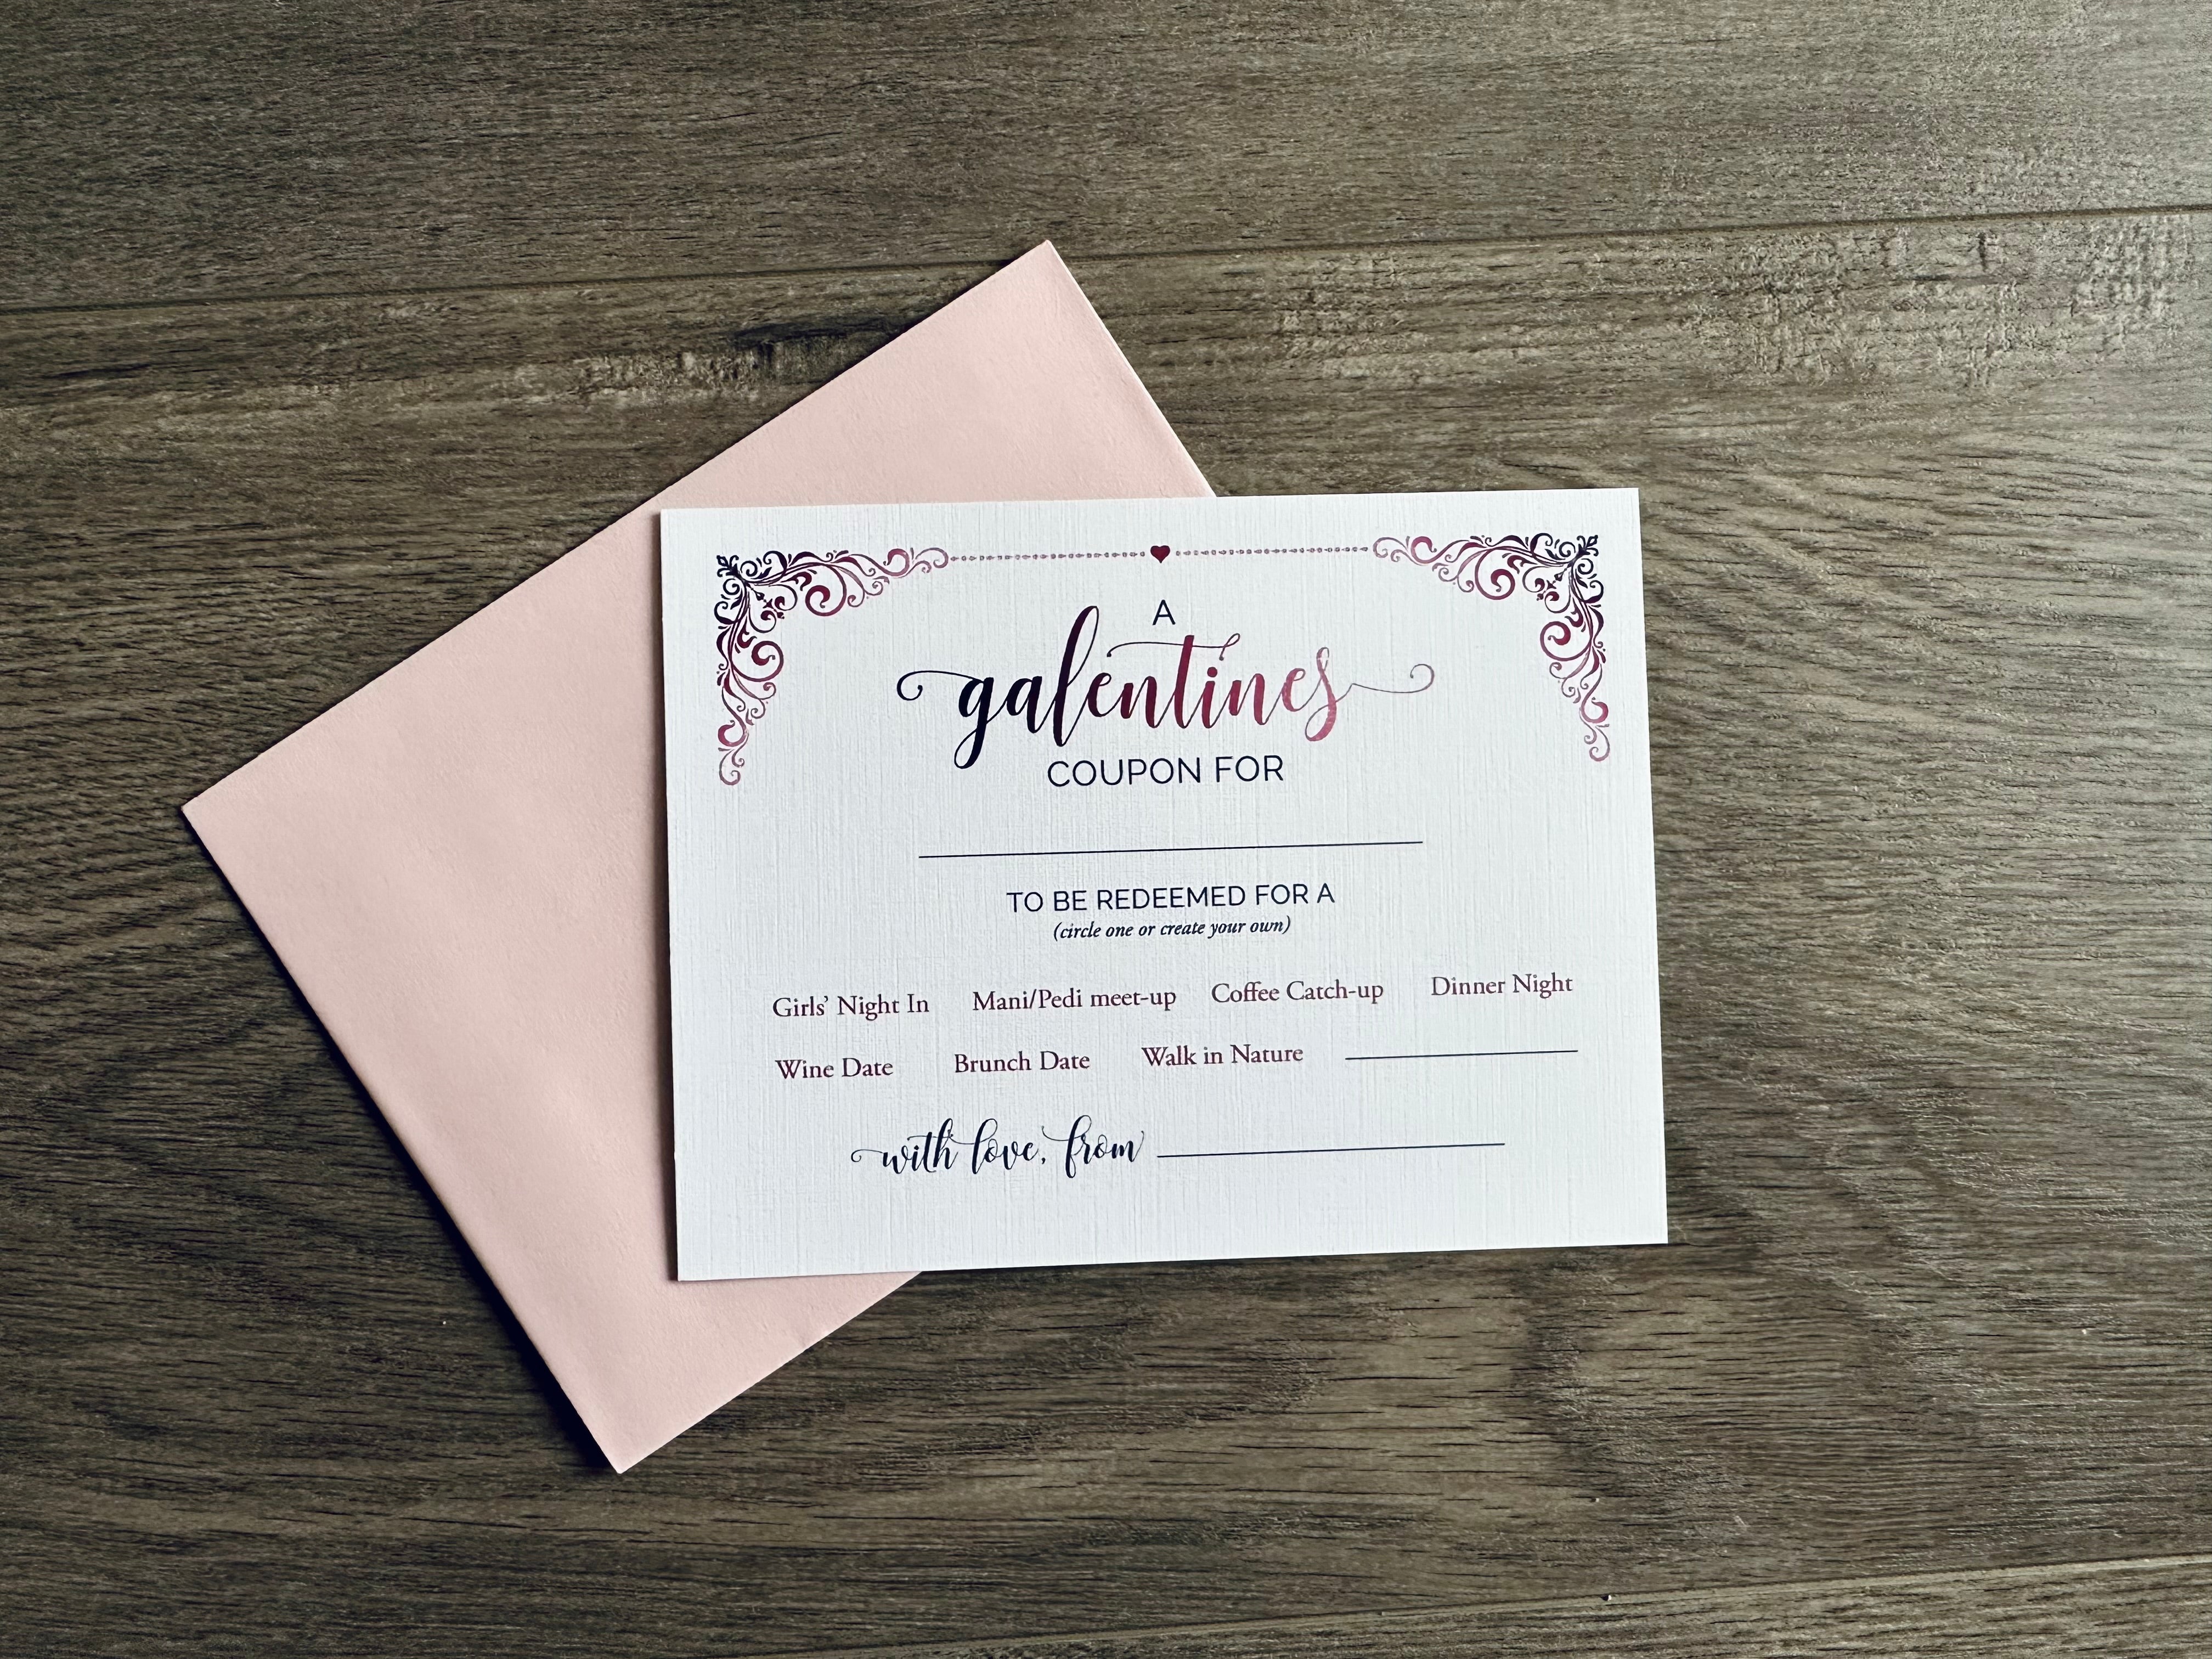 A white card and pale pink envelope lie flat on a wooden floor. The card is a "galentines coupon" with friend catch-up inspired ideas written as suggestions to do at a later date. By Stationare